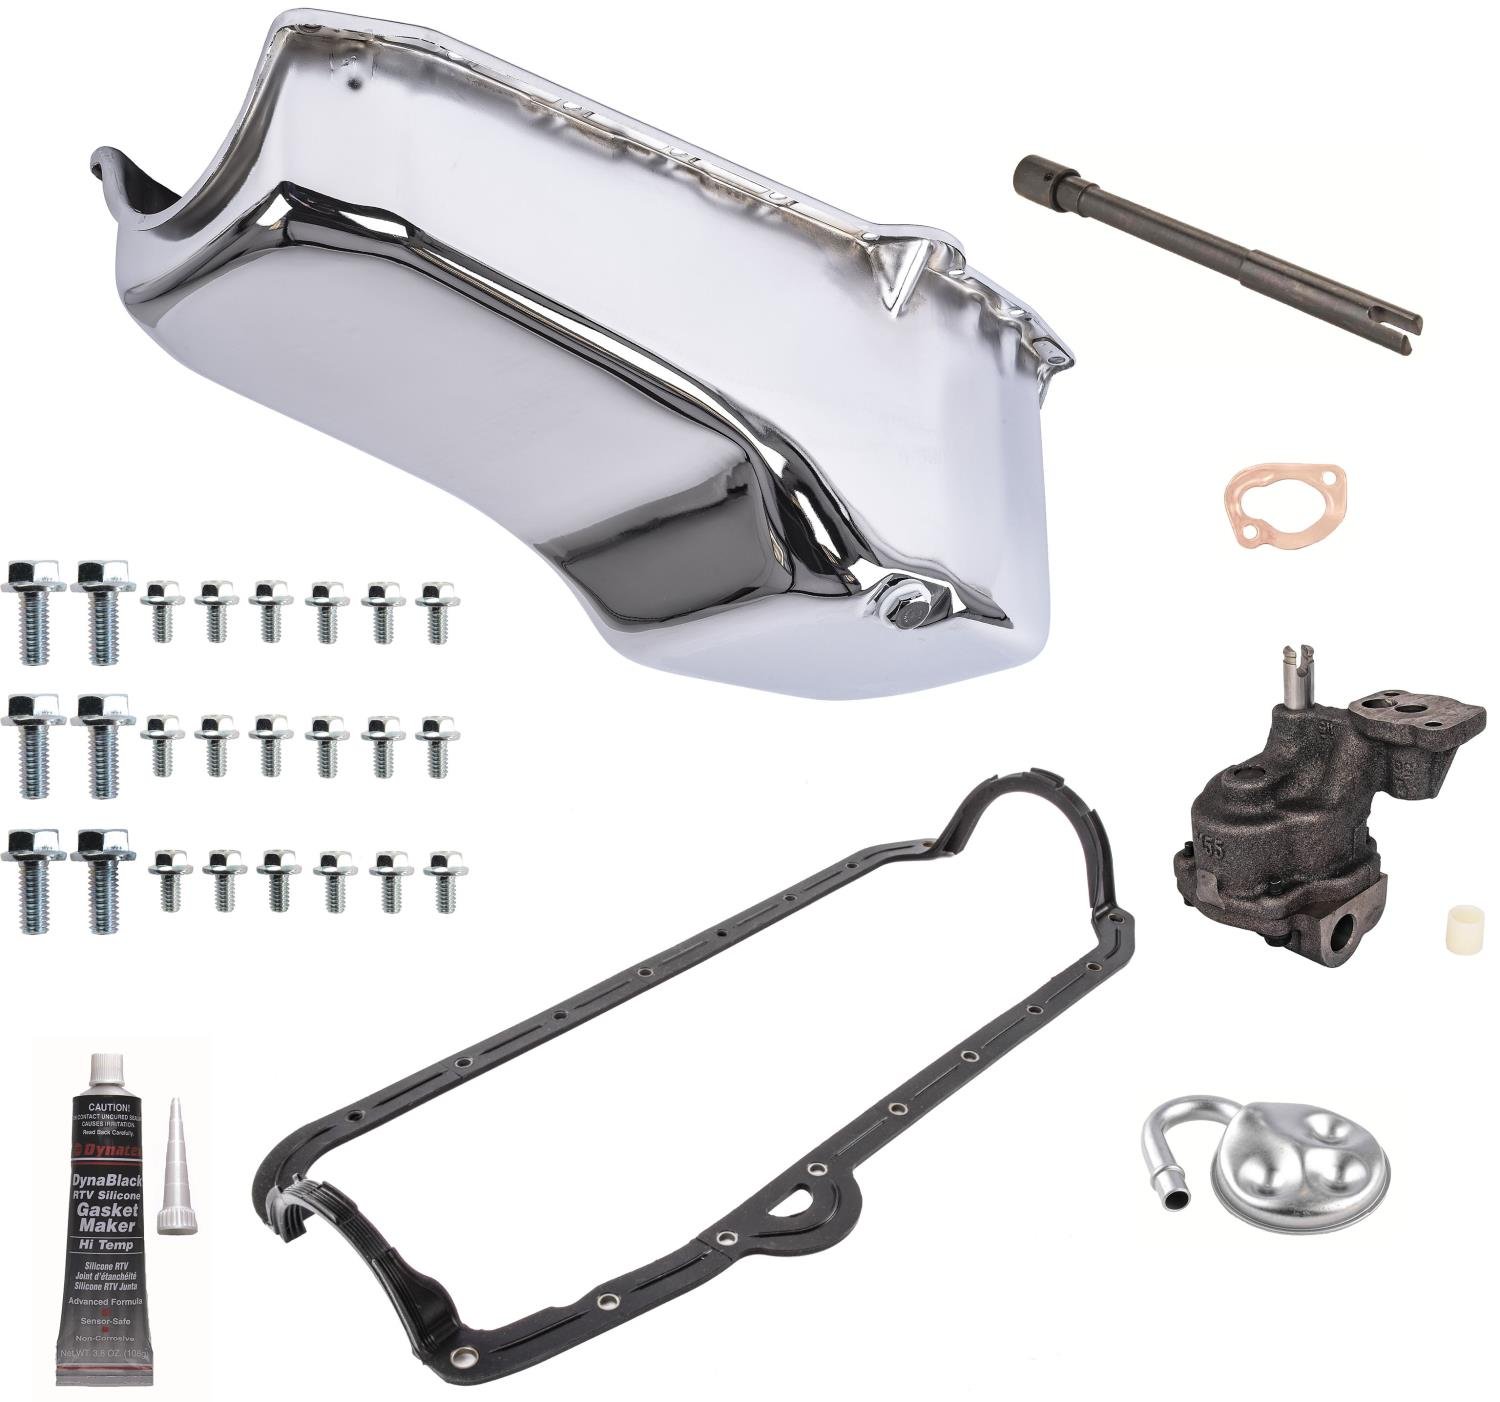 Stock-Style Replacement Oil Pan Kit with Oil Pump for 1955-1980 Small Block Chevy with Left/Driver Side Dip Stick [Chrome]